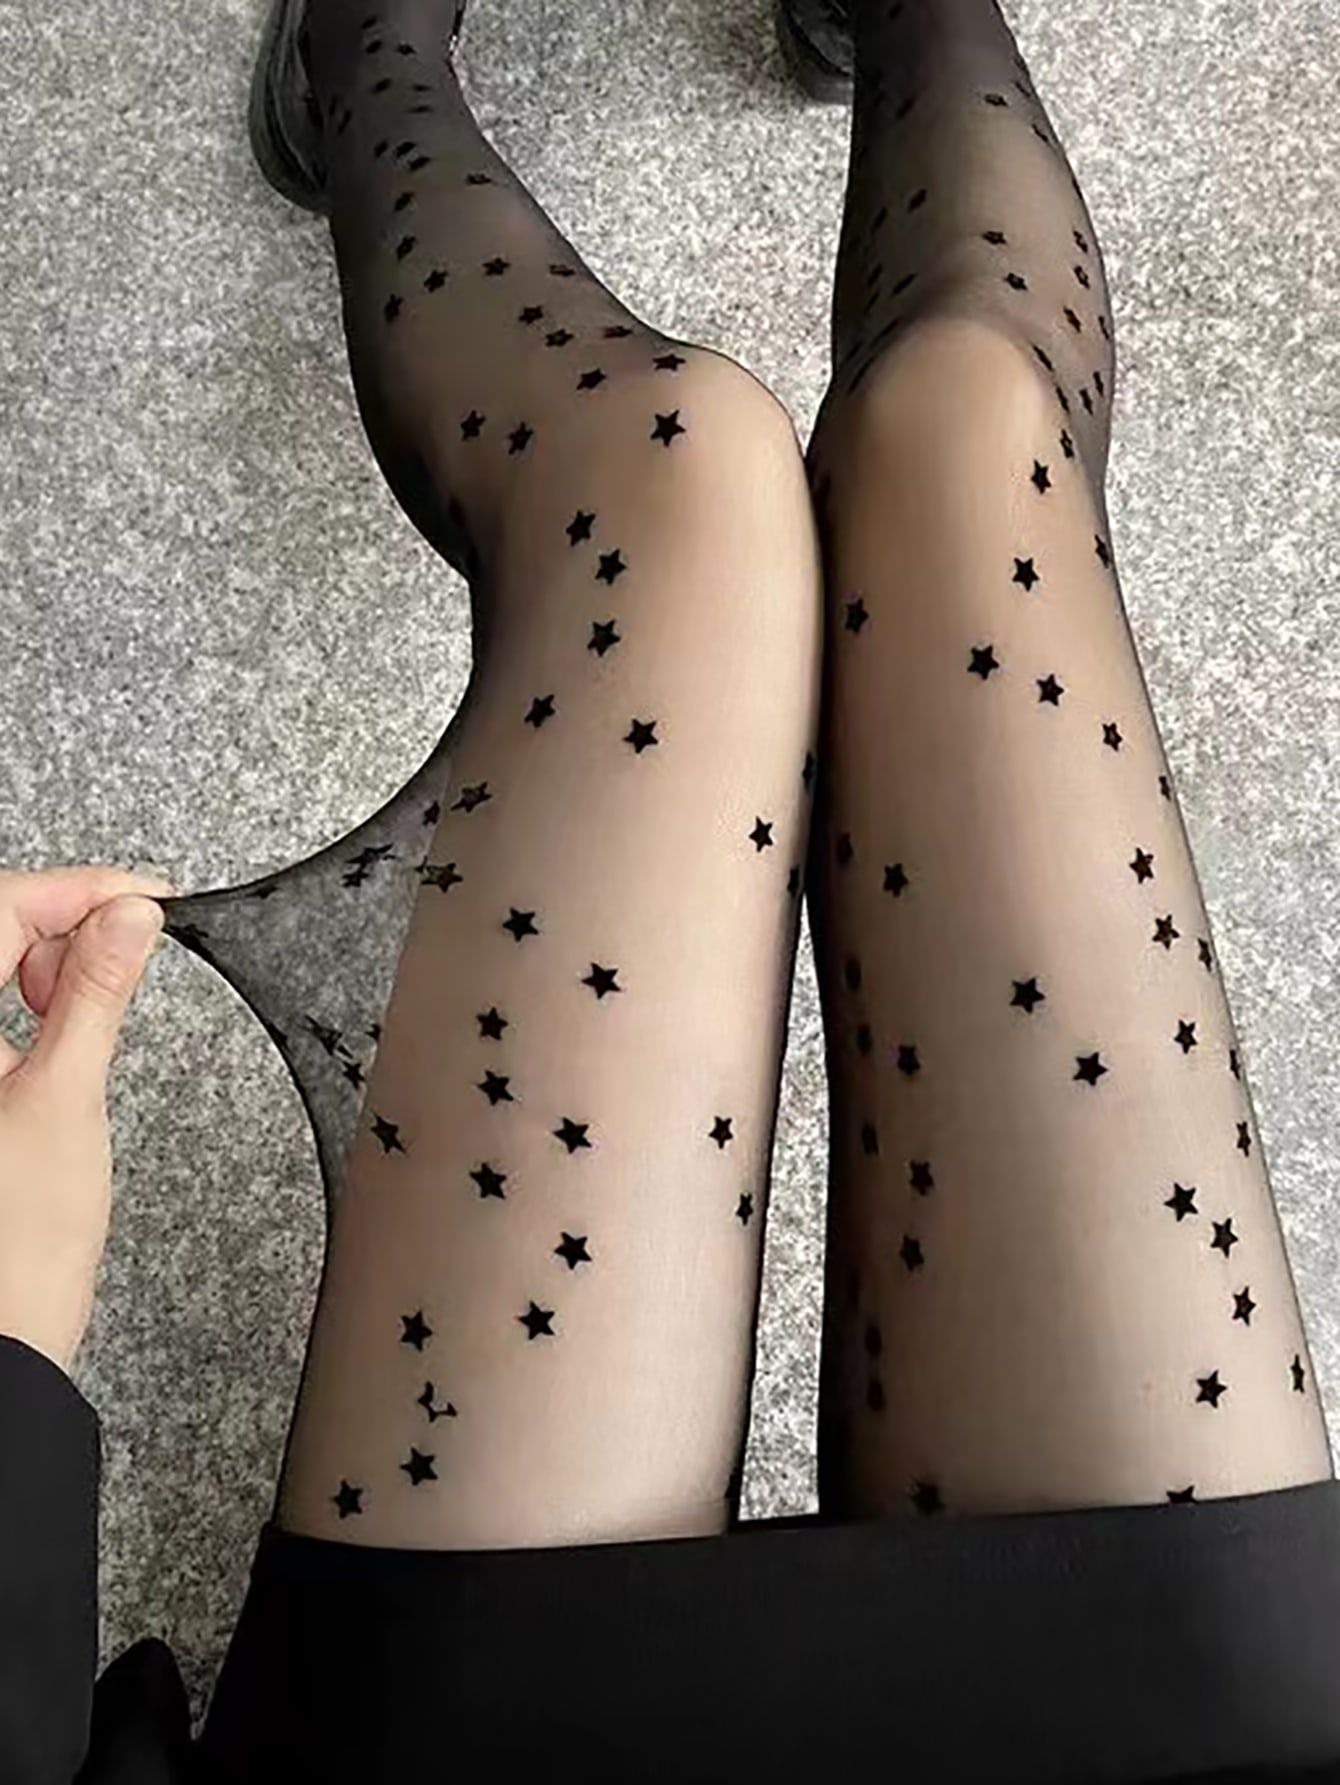 Patterned Tights To Make You Sensuous